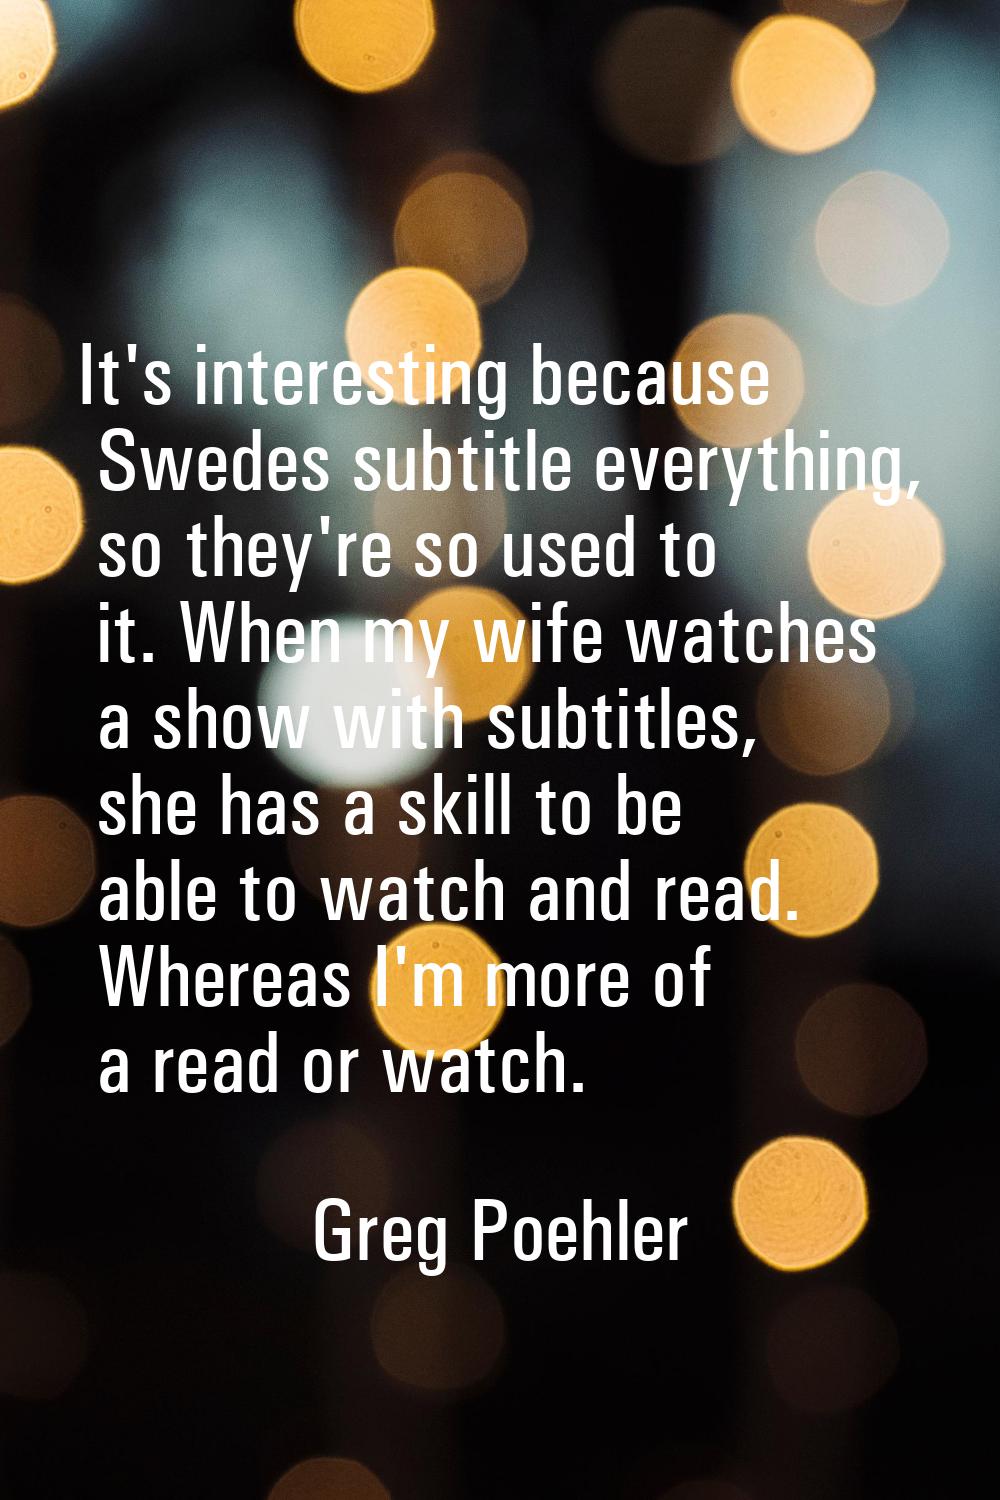 It's interesting because Swedes subtitle everything, so they're so used to it. When my wife watches